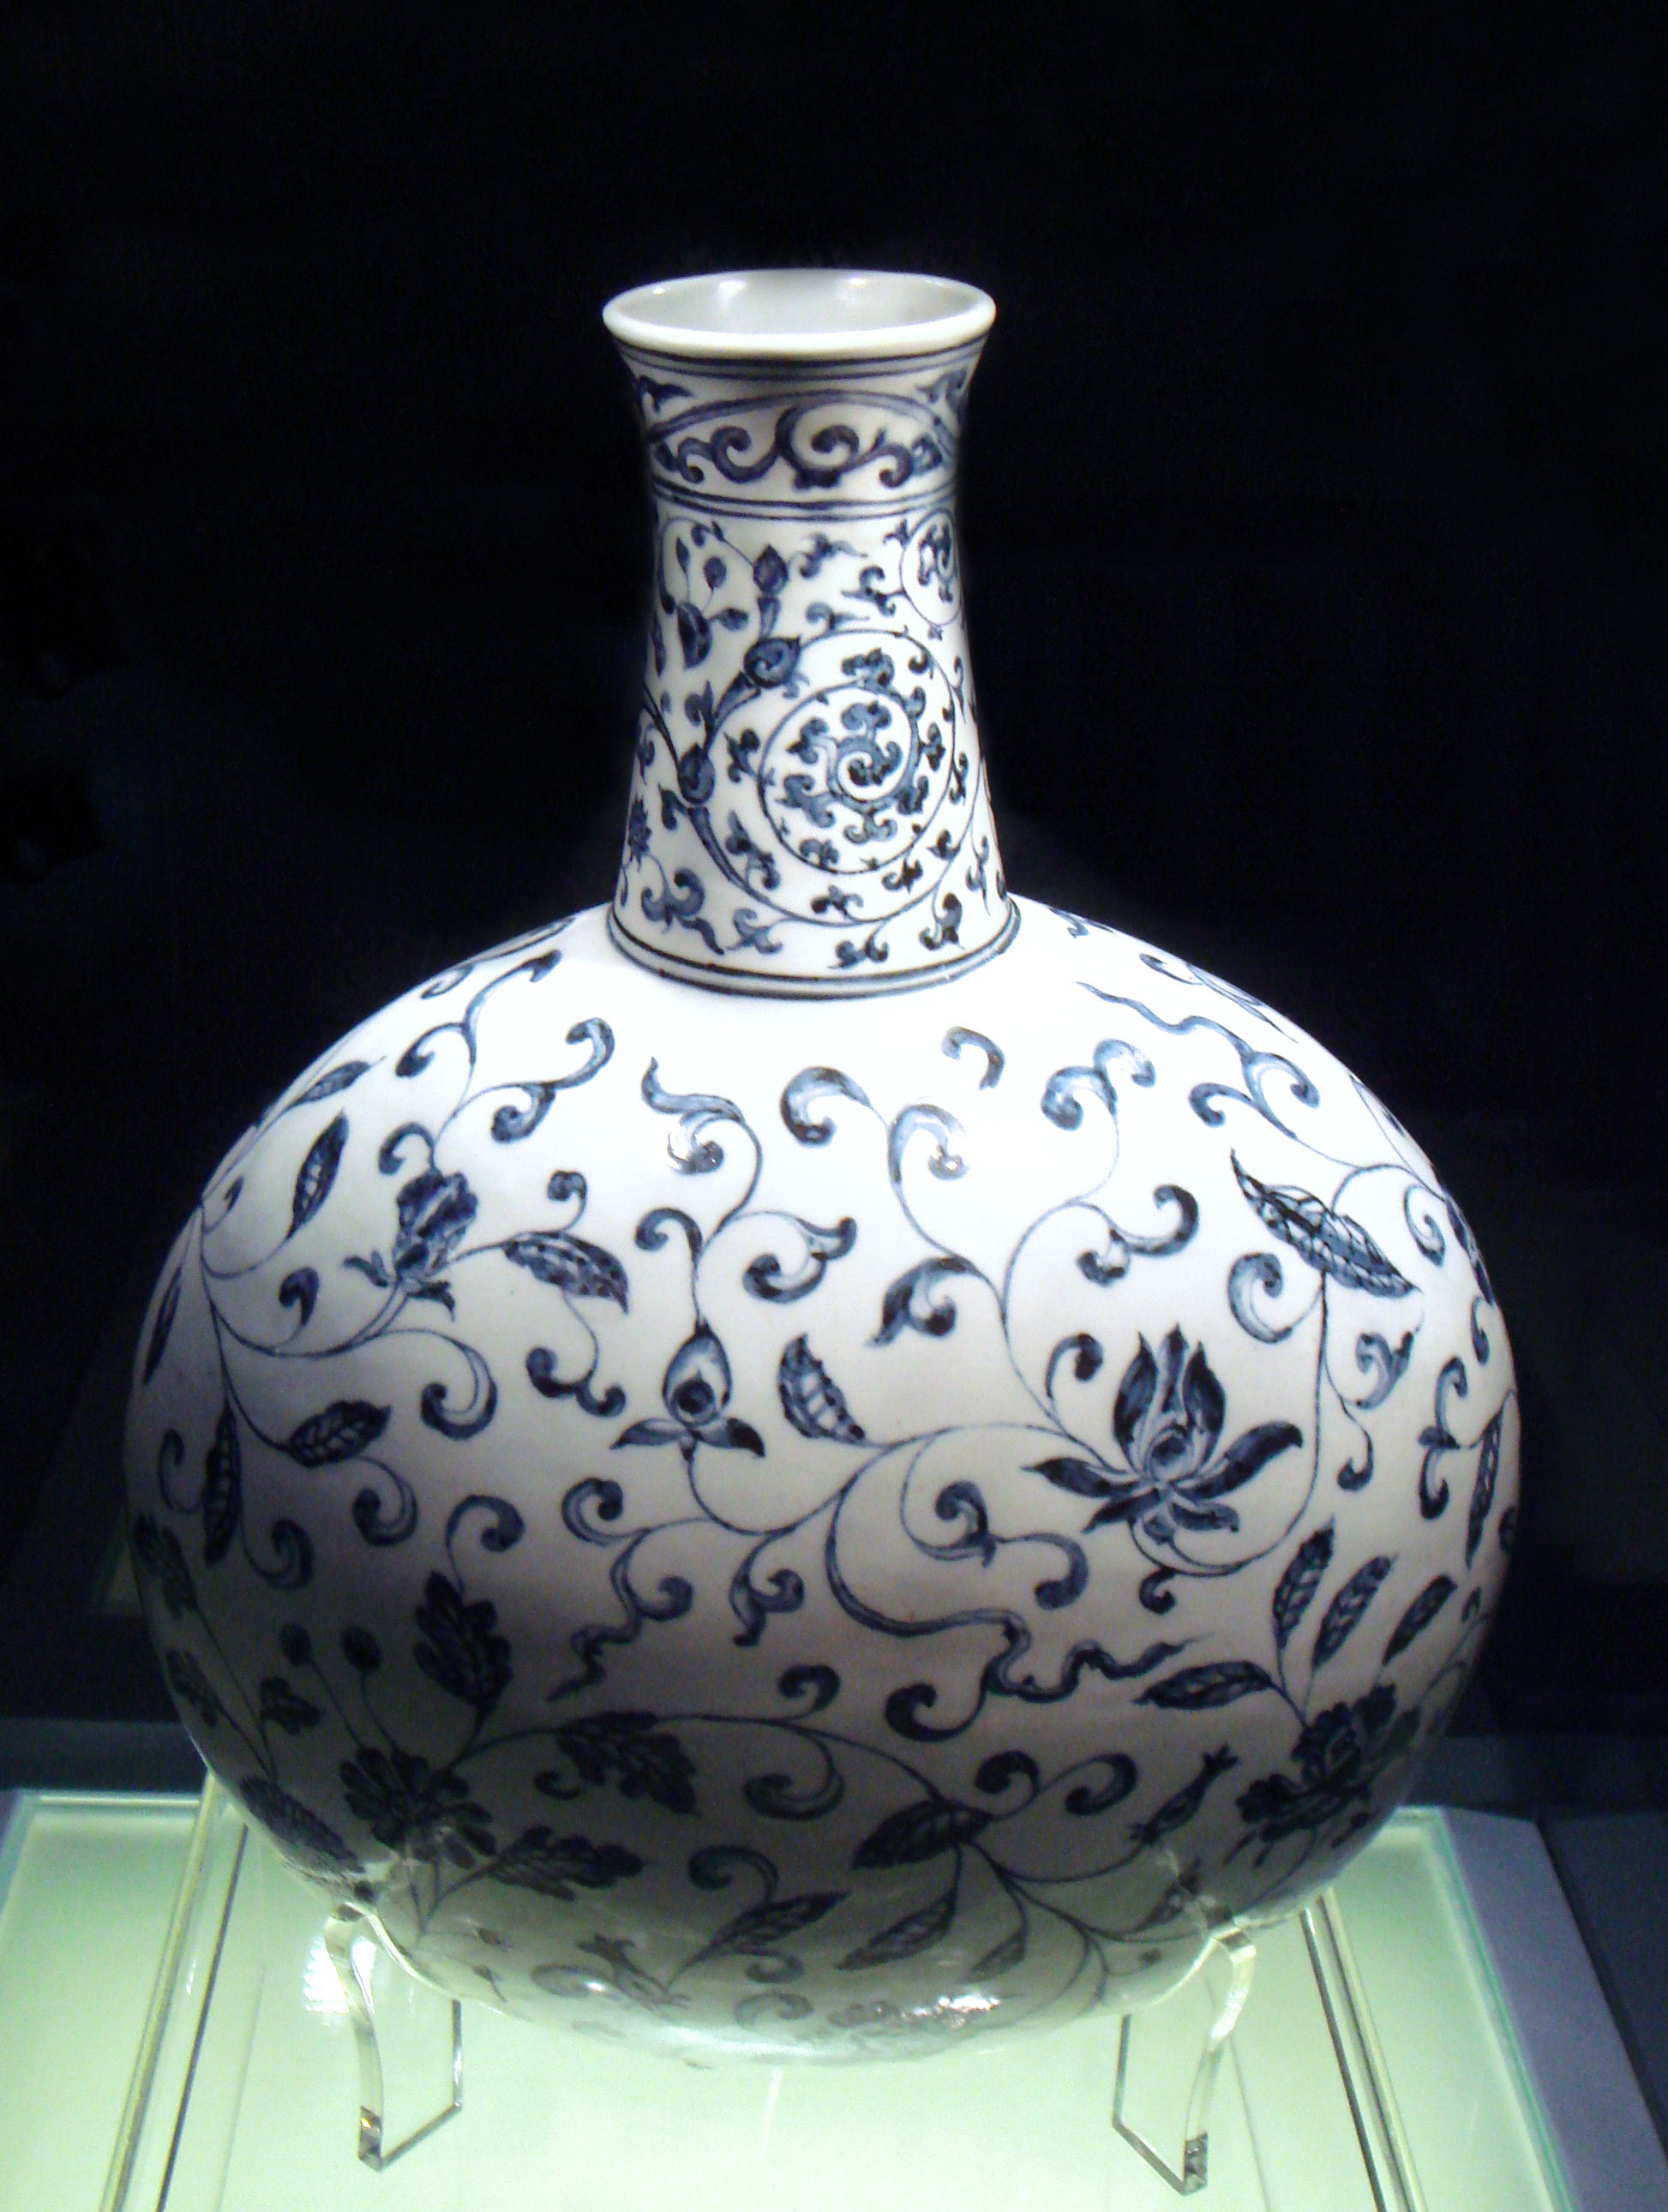 blue and white porcelain flower vase of fileblue and white vase jingdezhen ming yongle 1403 1424 within fileblue and white vase jingdezhen ming yongle 1403 1424